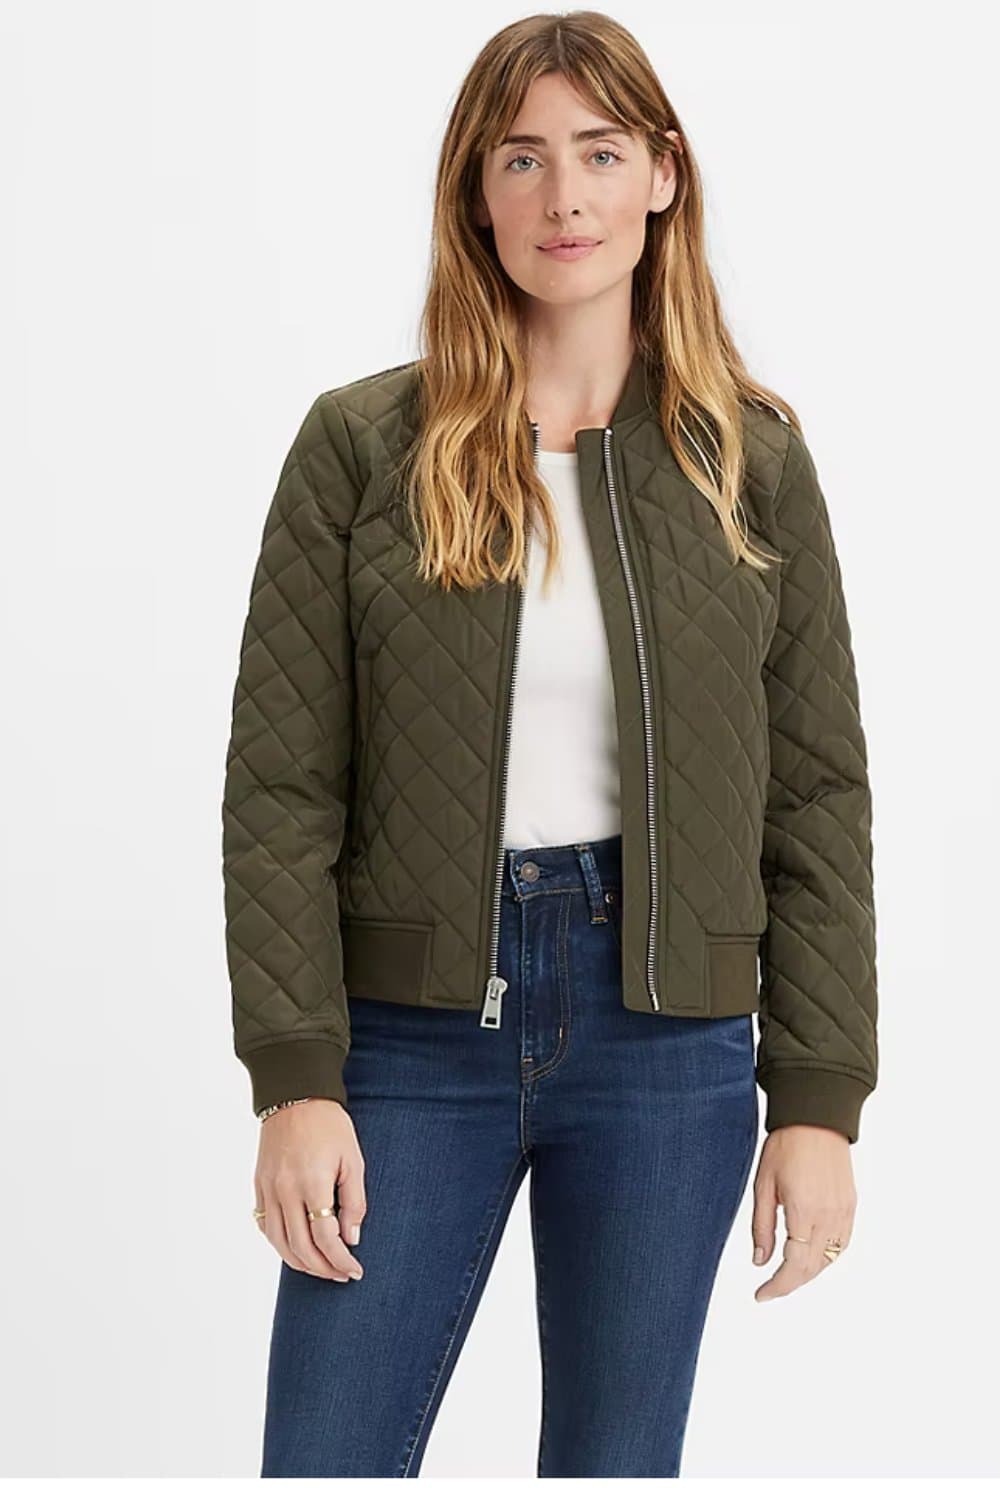 Levi's Quilted Bomber Jacket